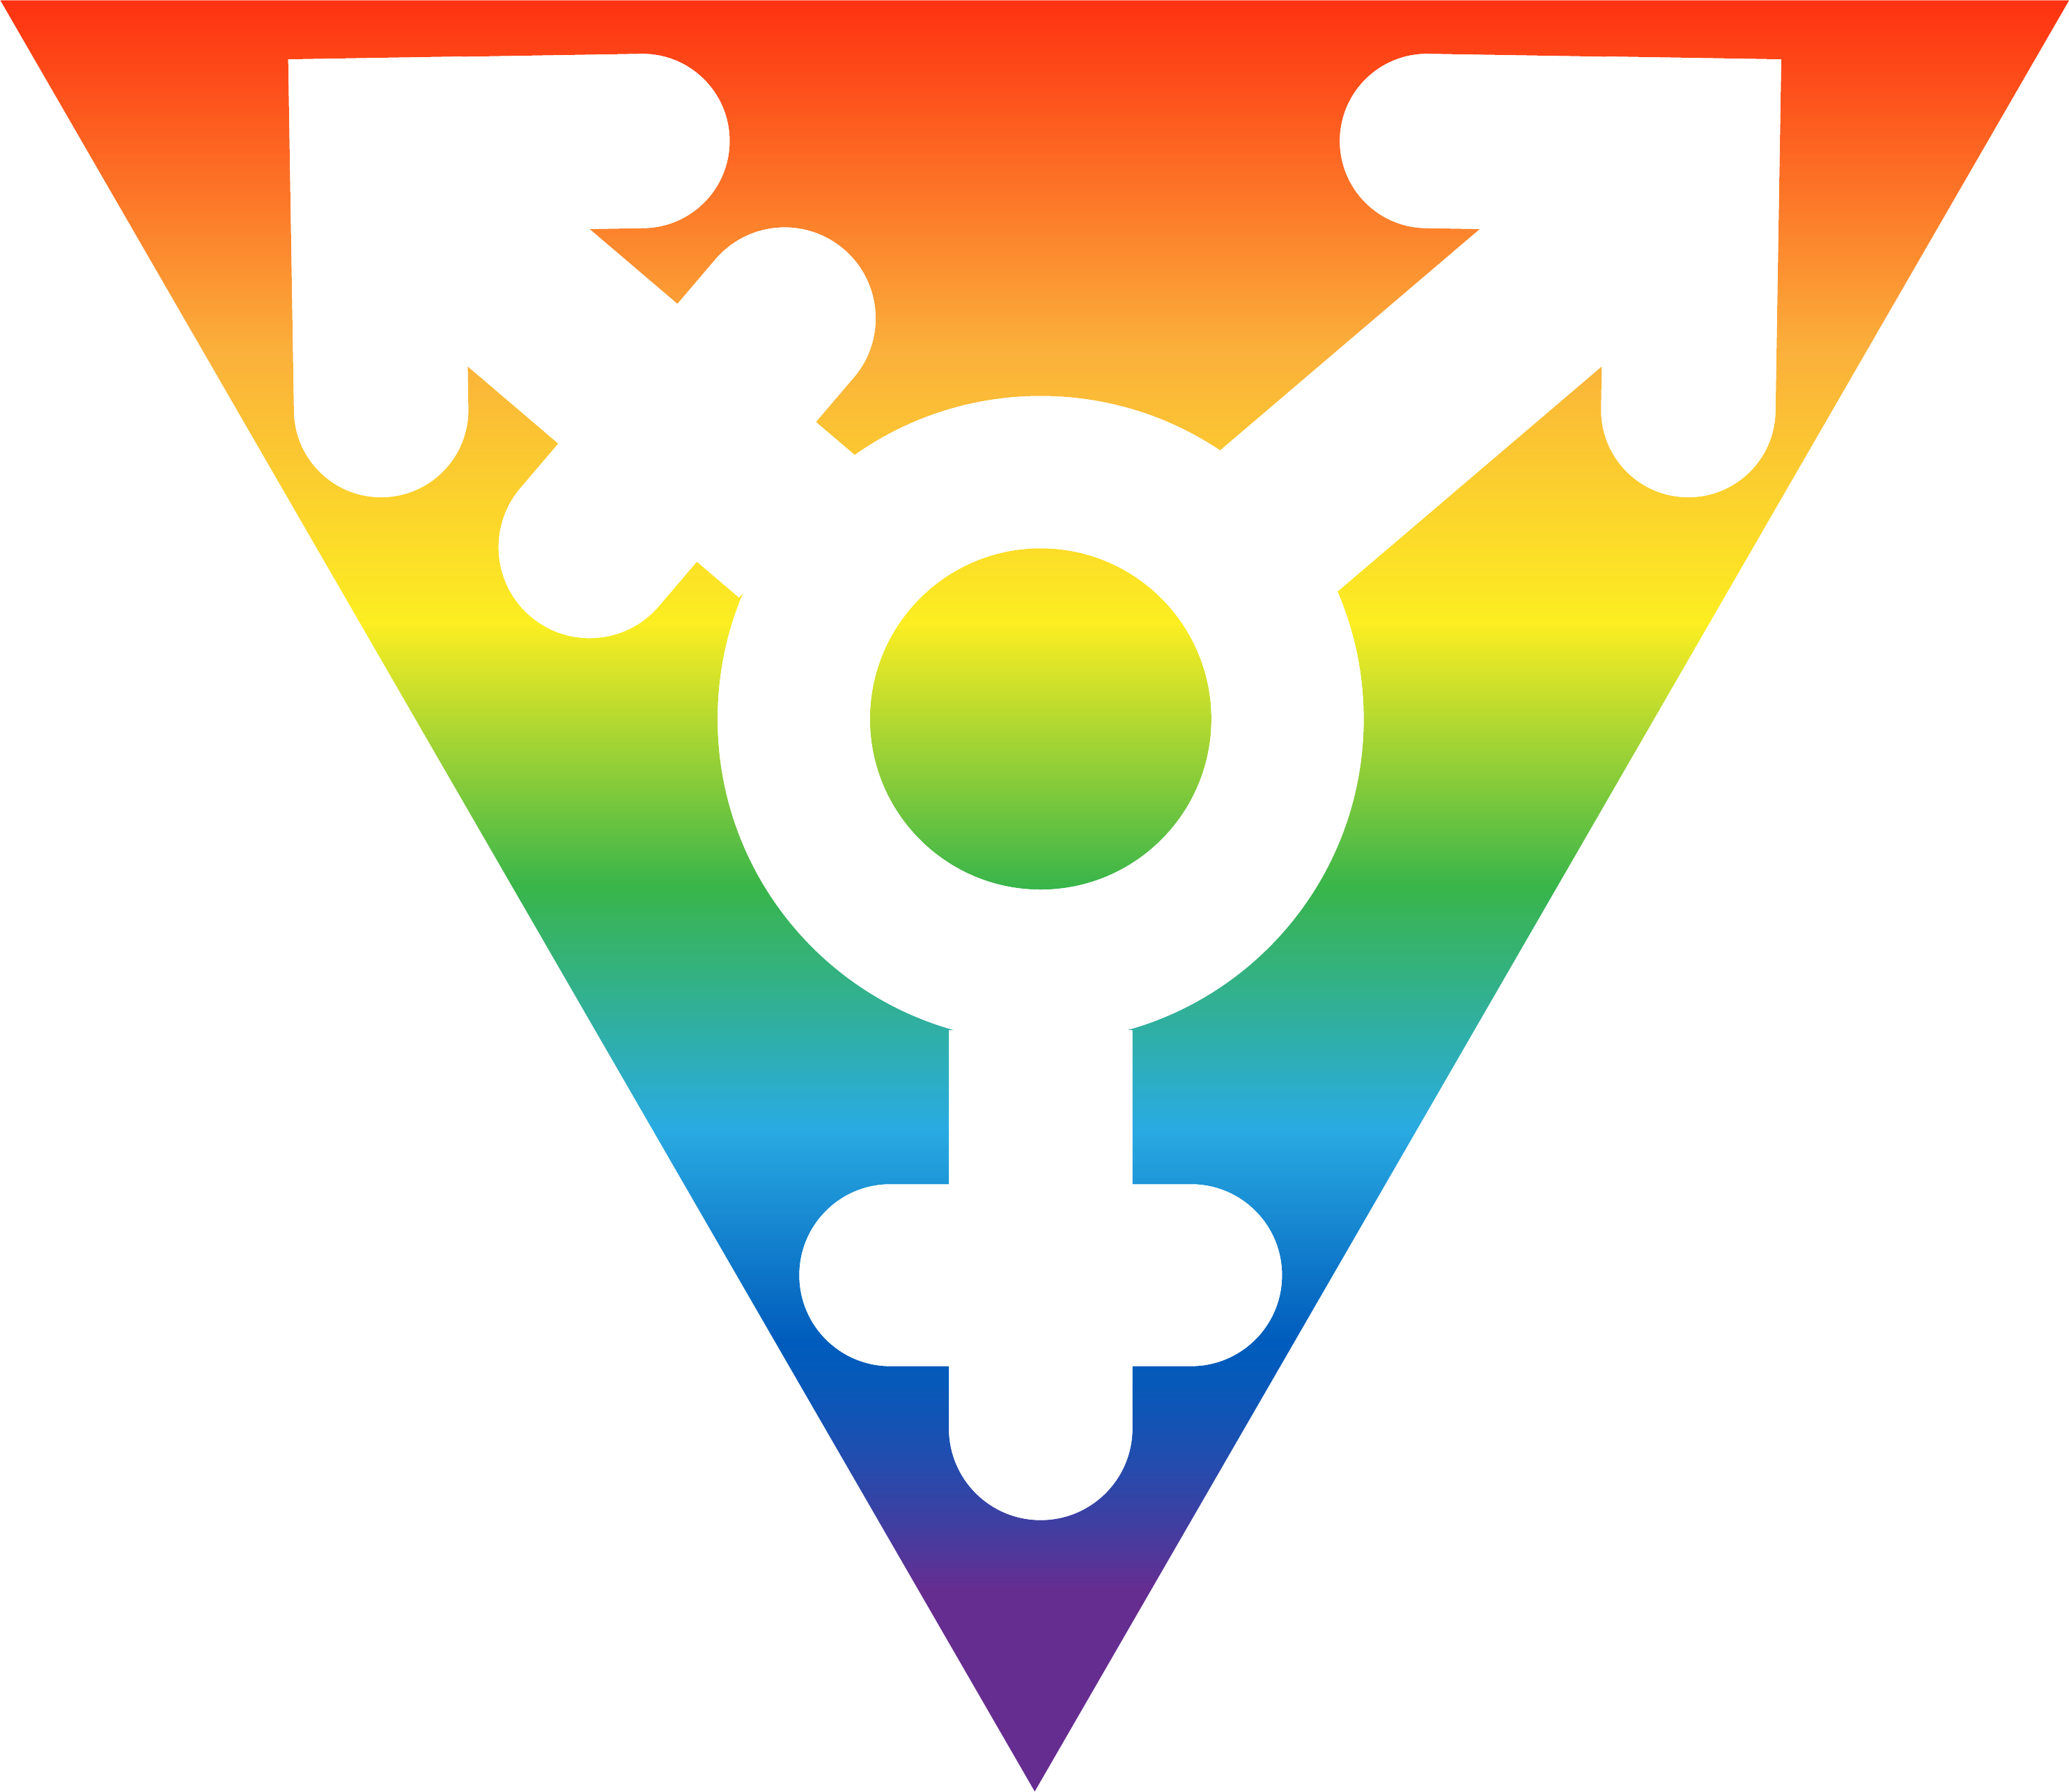 This office is a safe space for all people including lesbian, gay, bisexual, pansexual, asexual, straight, two-spirit, transgender, cisgender, queer, questioning, ally.